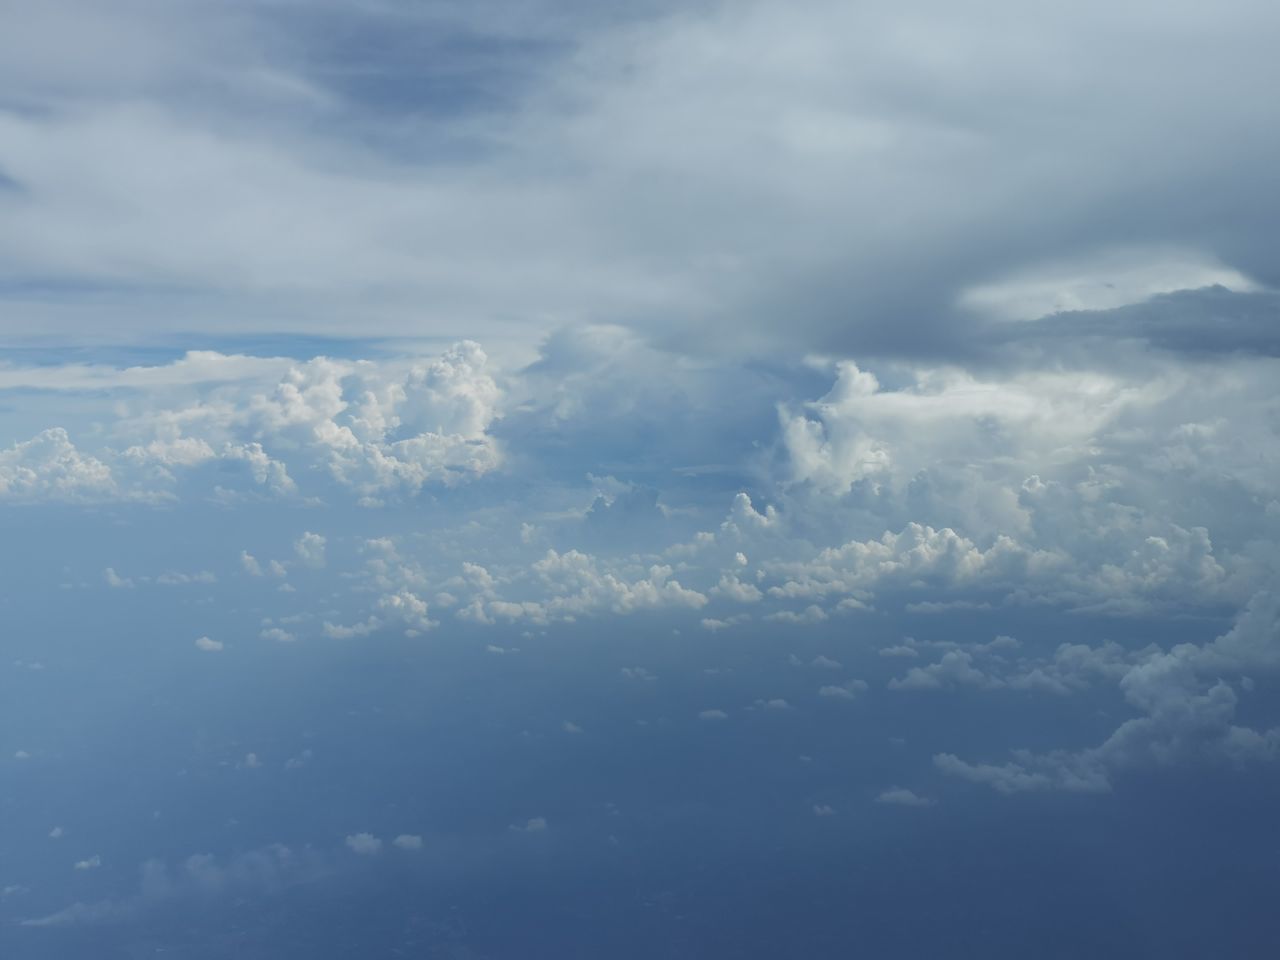 sky, cloud, beauty in nature, nature, cloudscape, horizon, environment, scenics - nature, no people, aerial view, day, tranquility, outdoors, airplane, blue, sunlight, tranquil scene, white, overcast, idyllic, atmosphere, mountain, winter, fluffy, air vehicle, snow, backgrounds, flying, cold temperature, high up